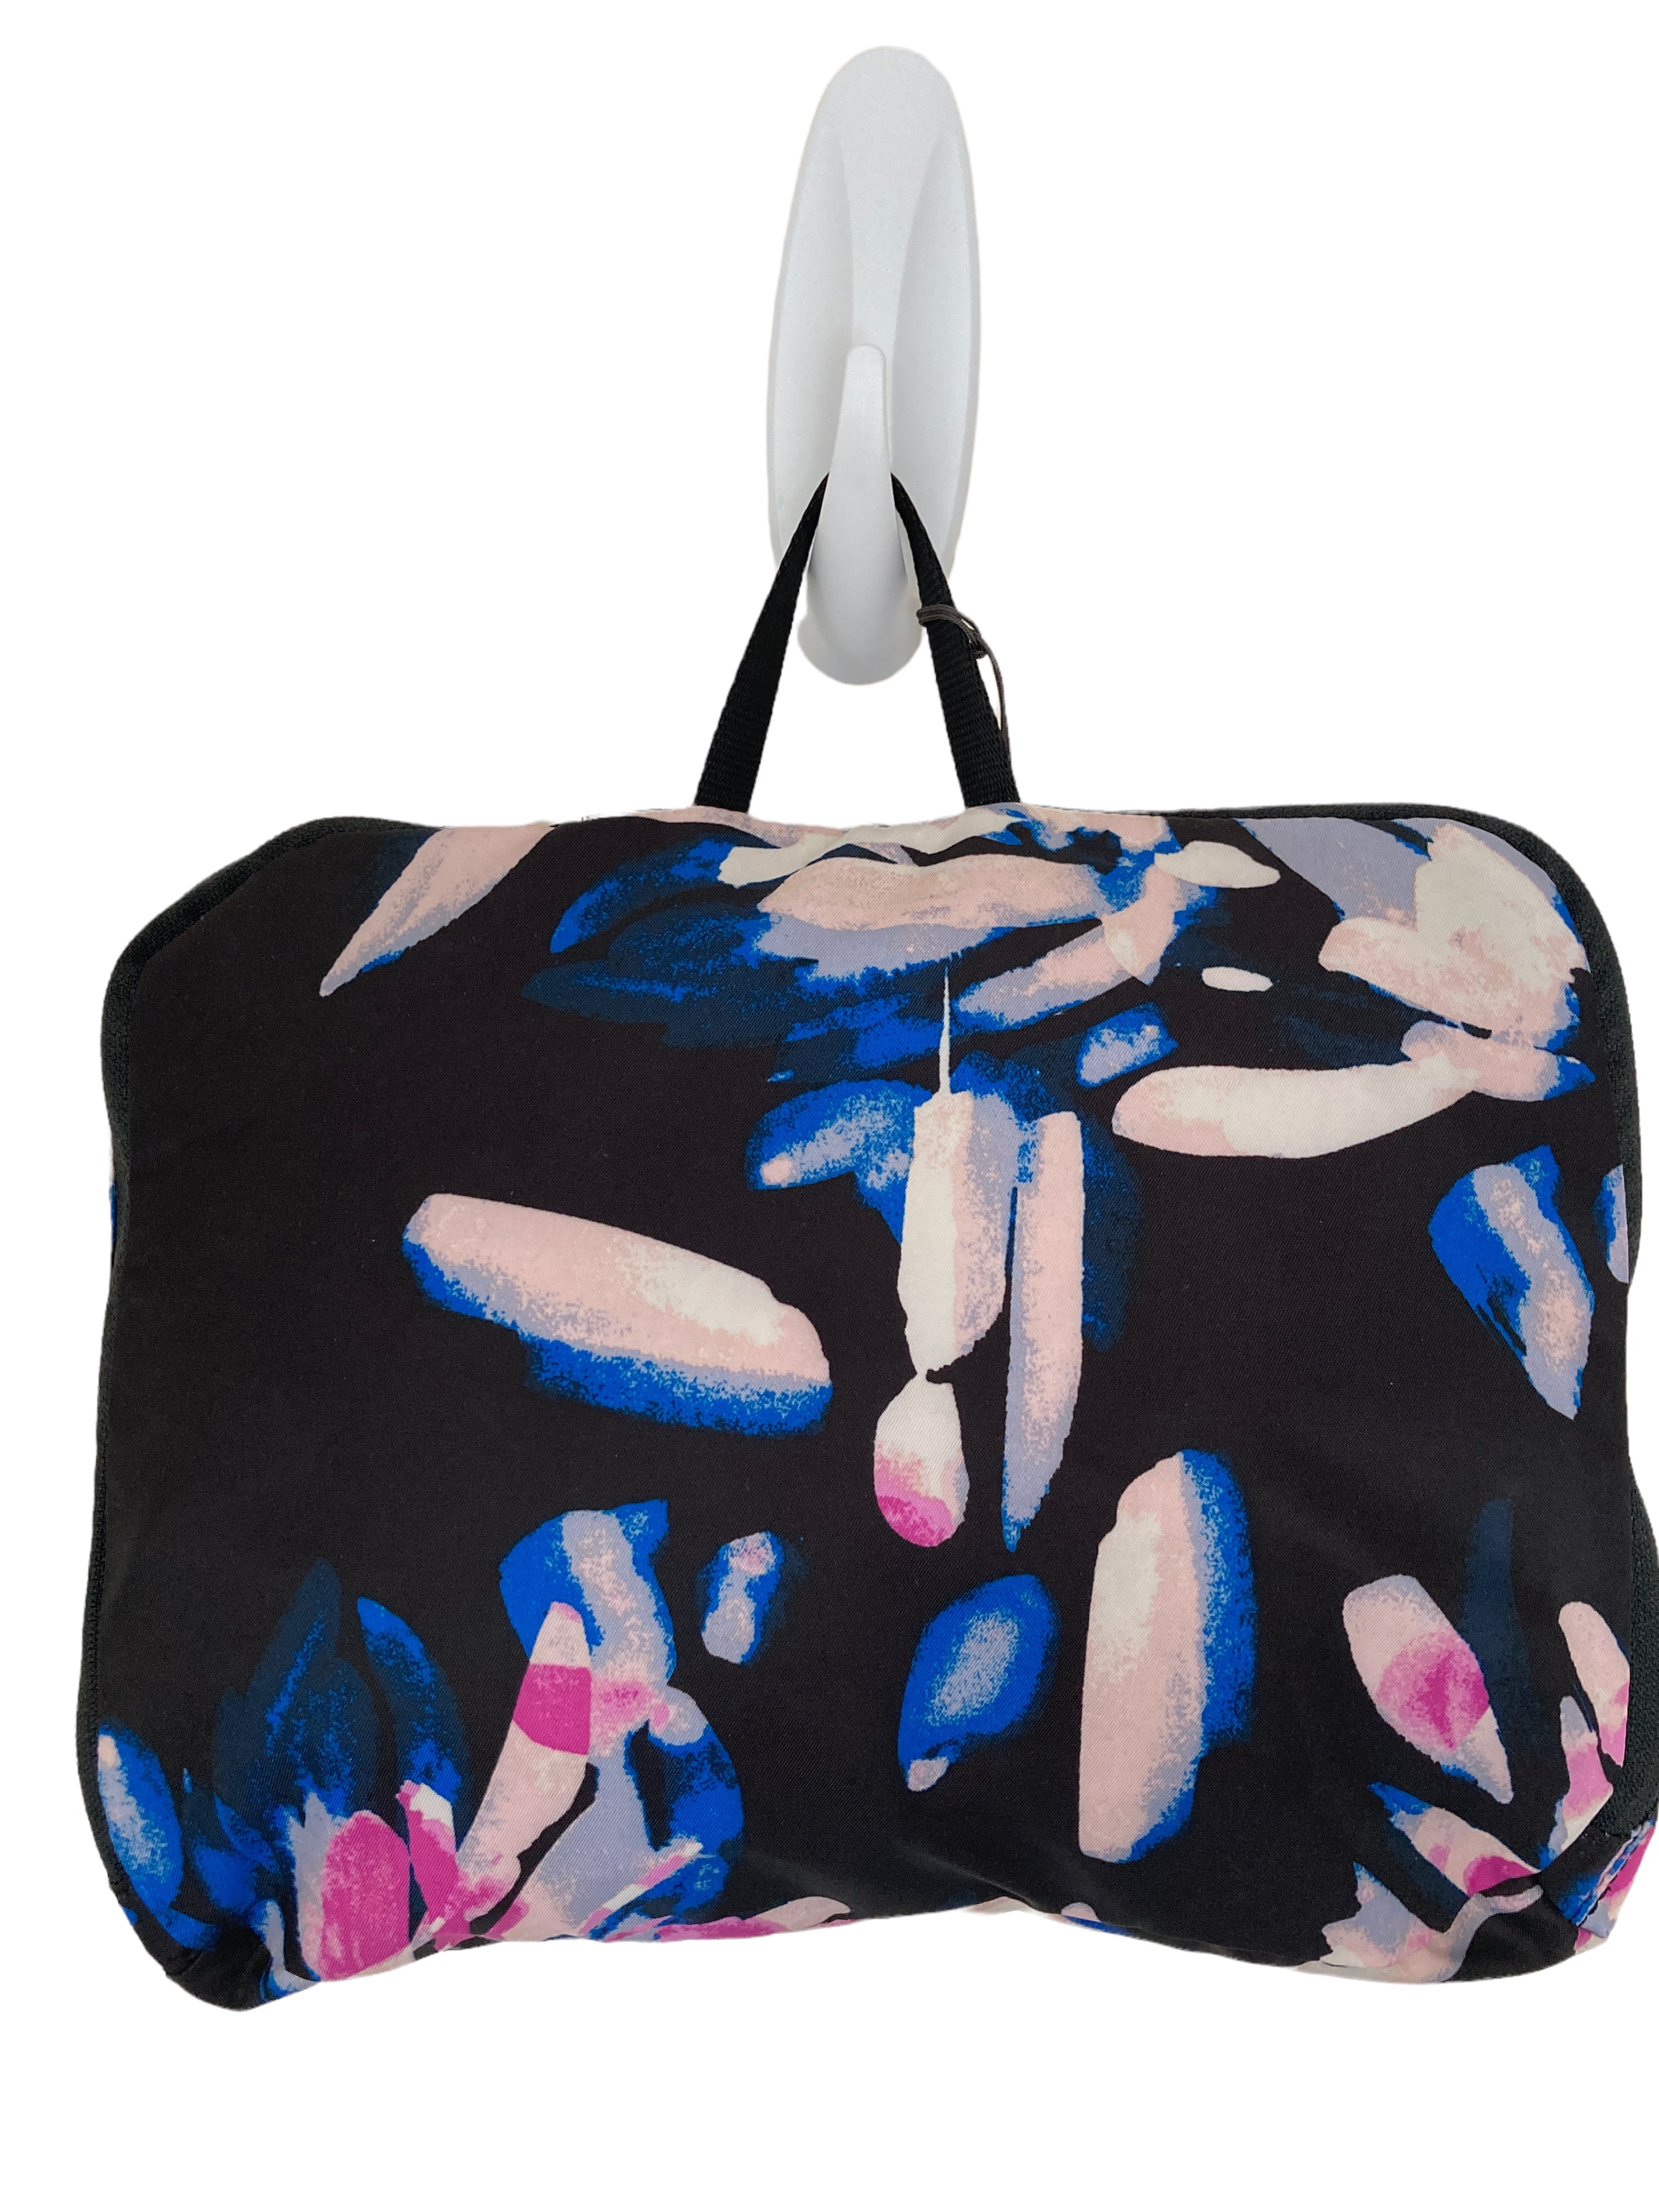 TUMI Black/Floral Packable Backpack